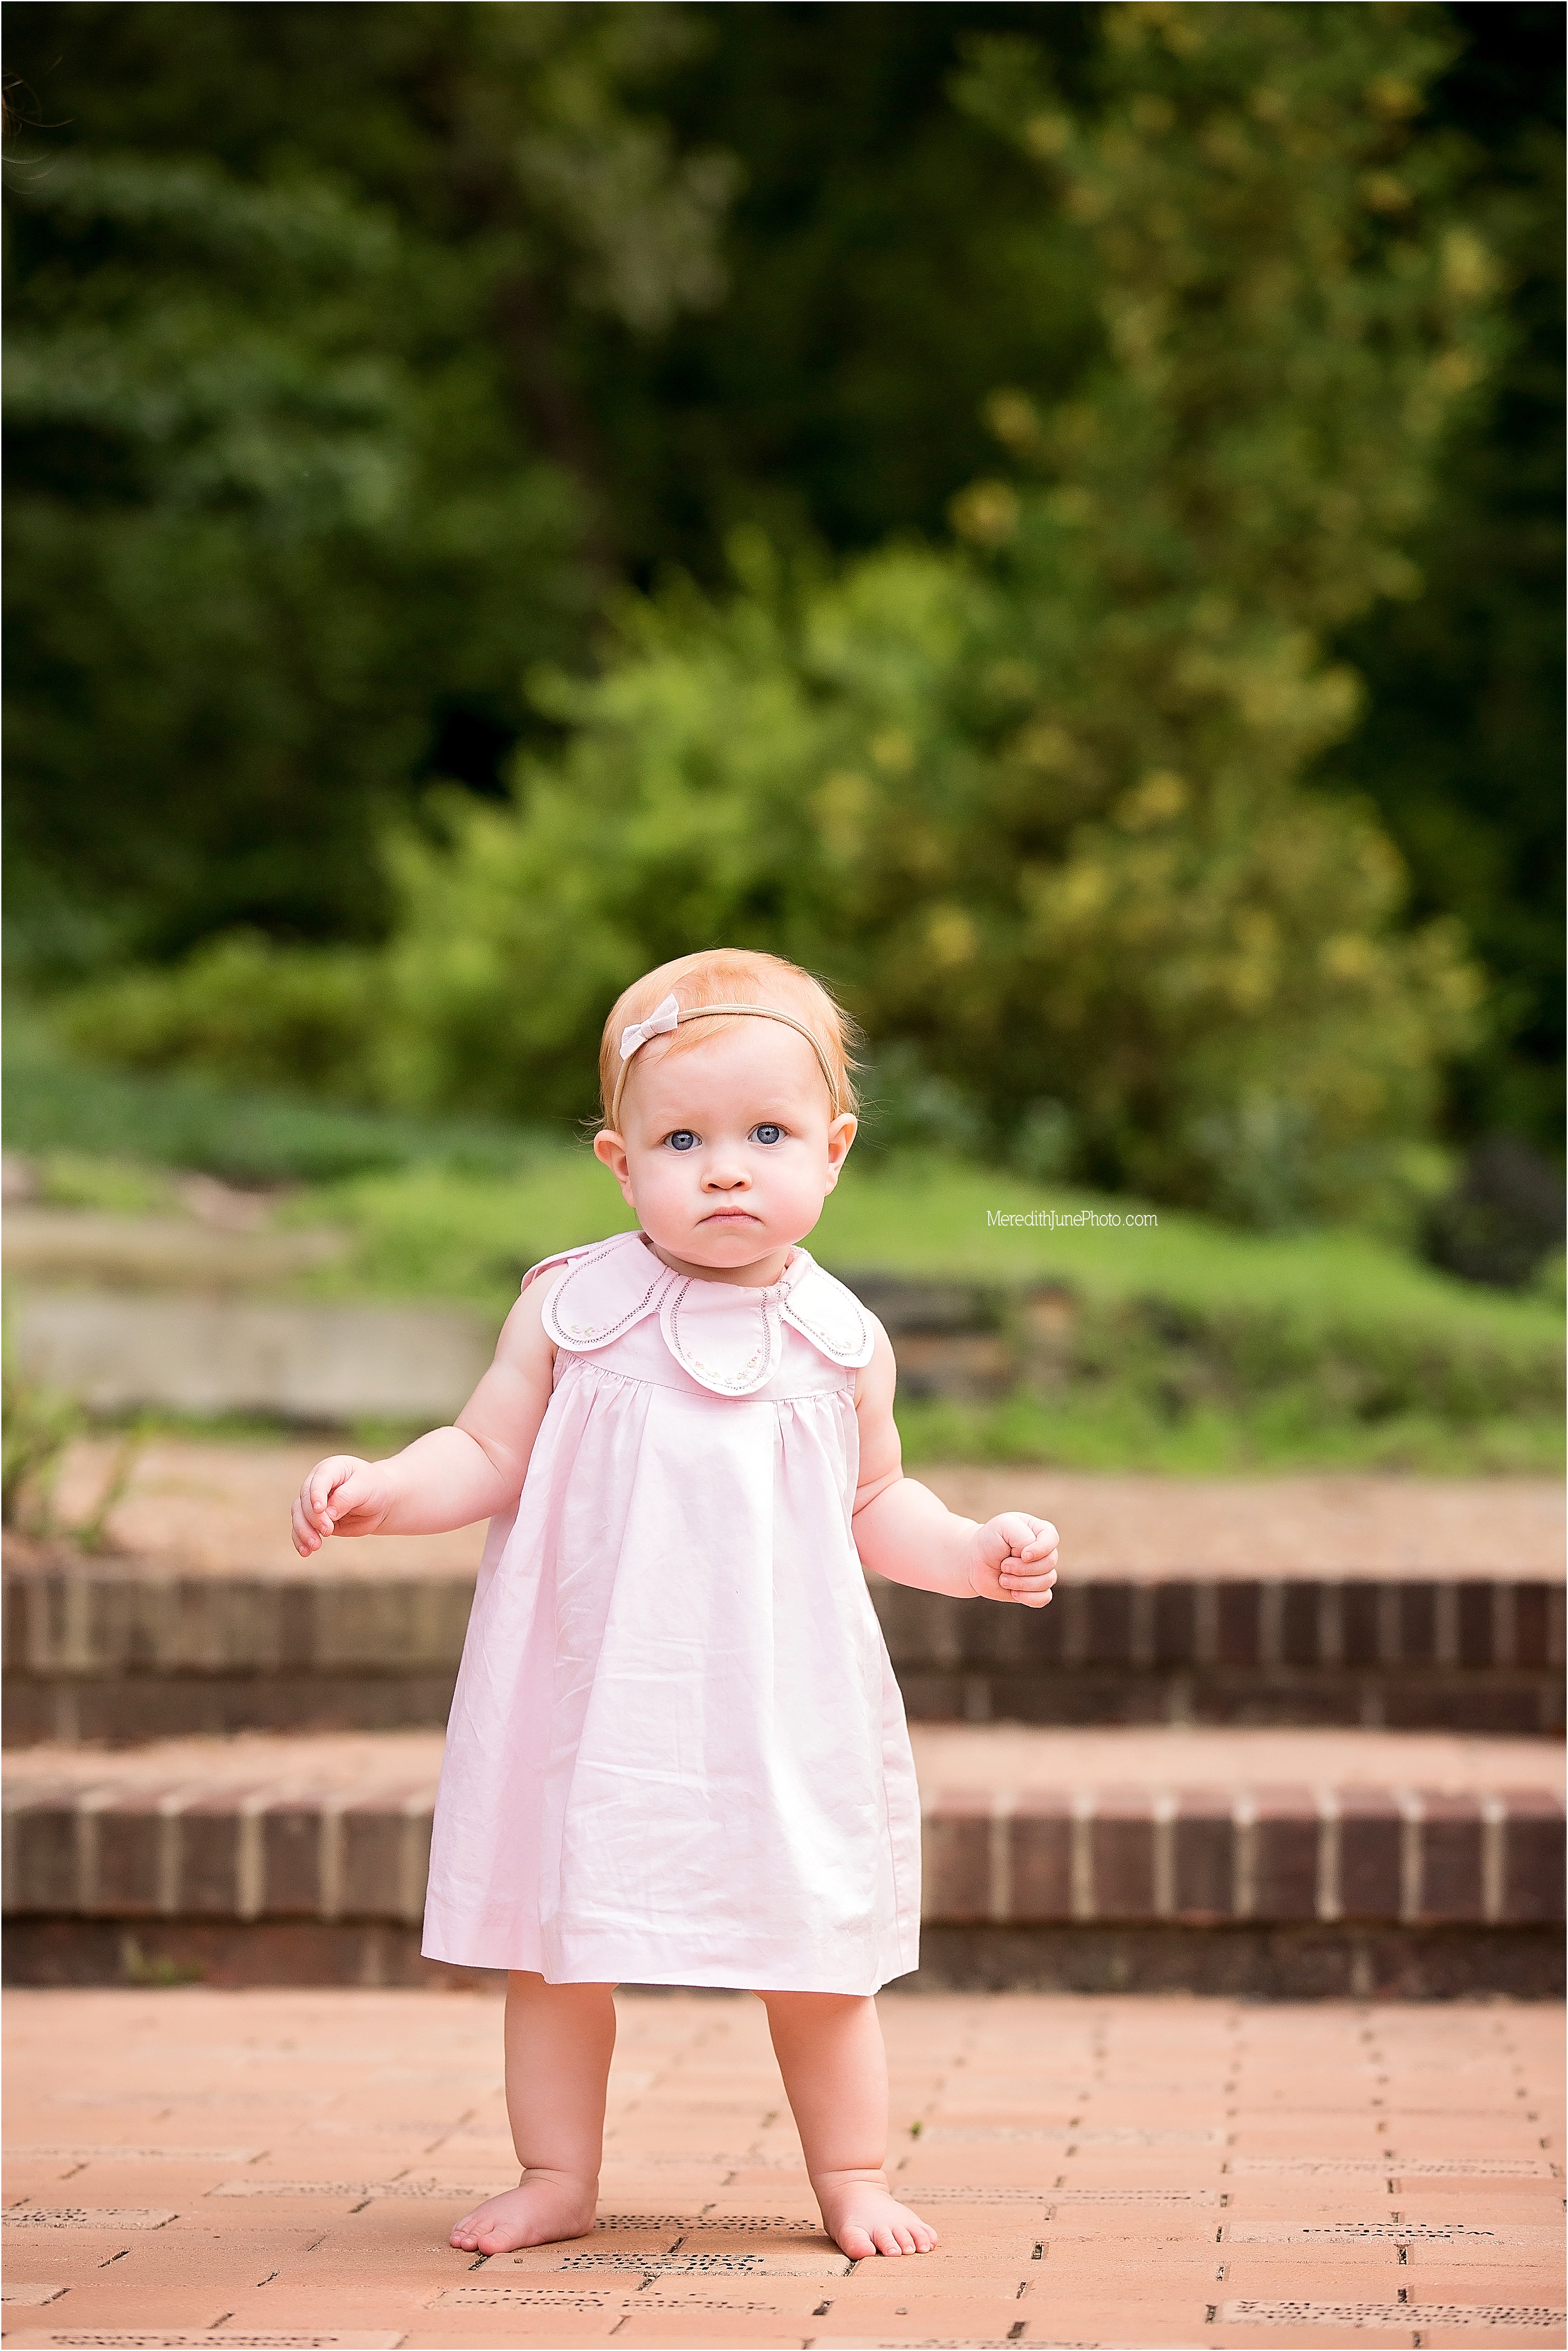 First birthday photo session for baby girl